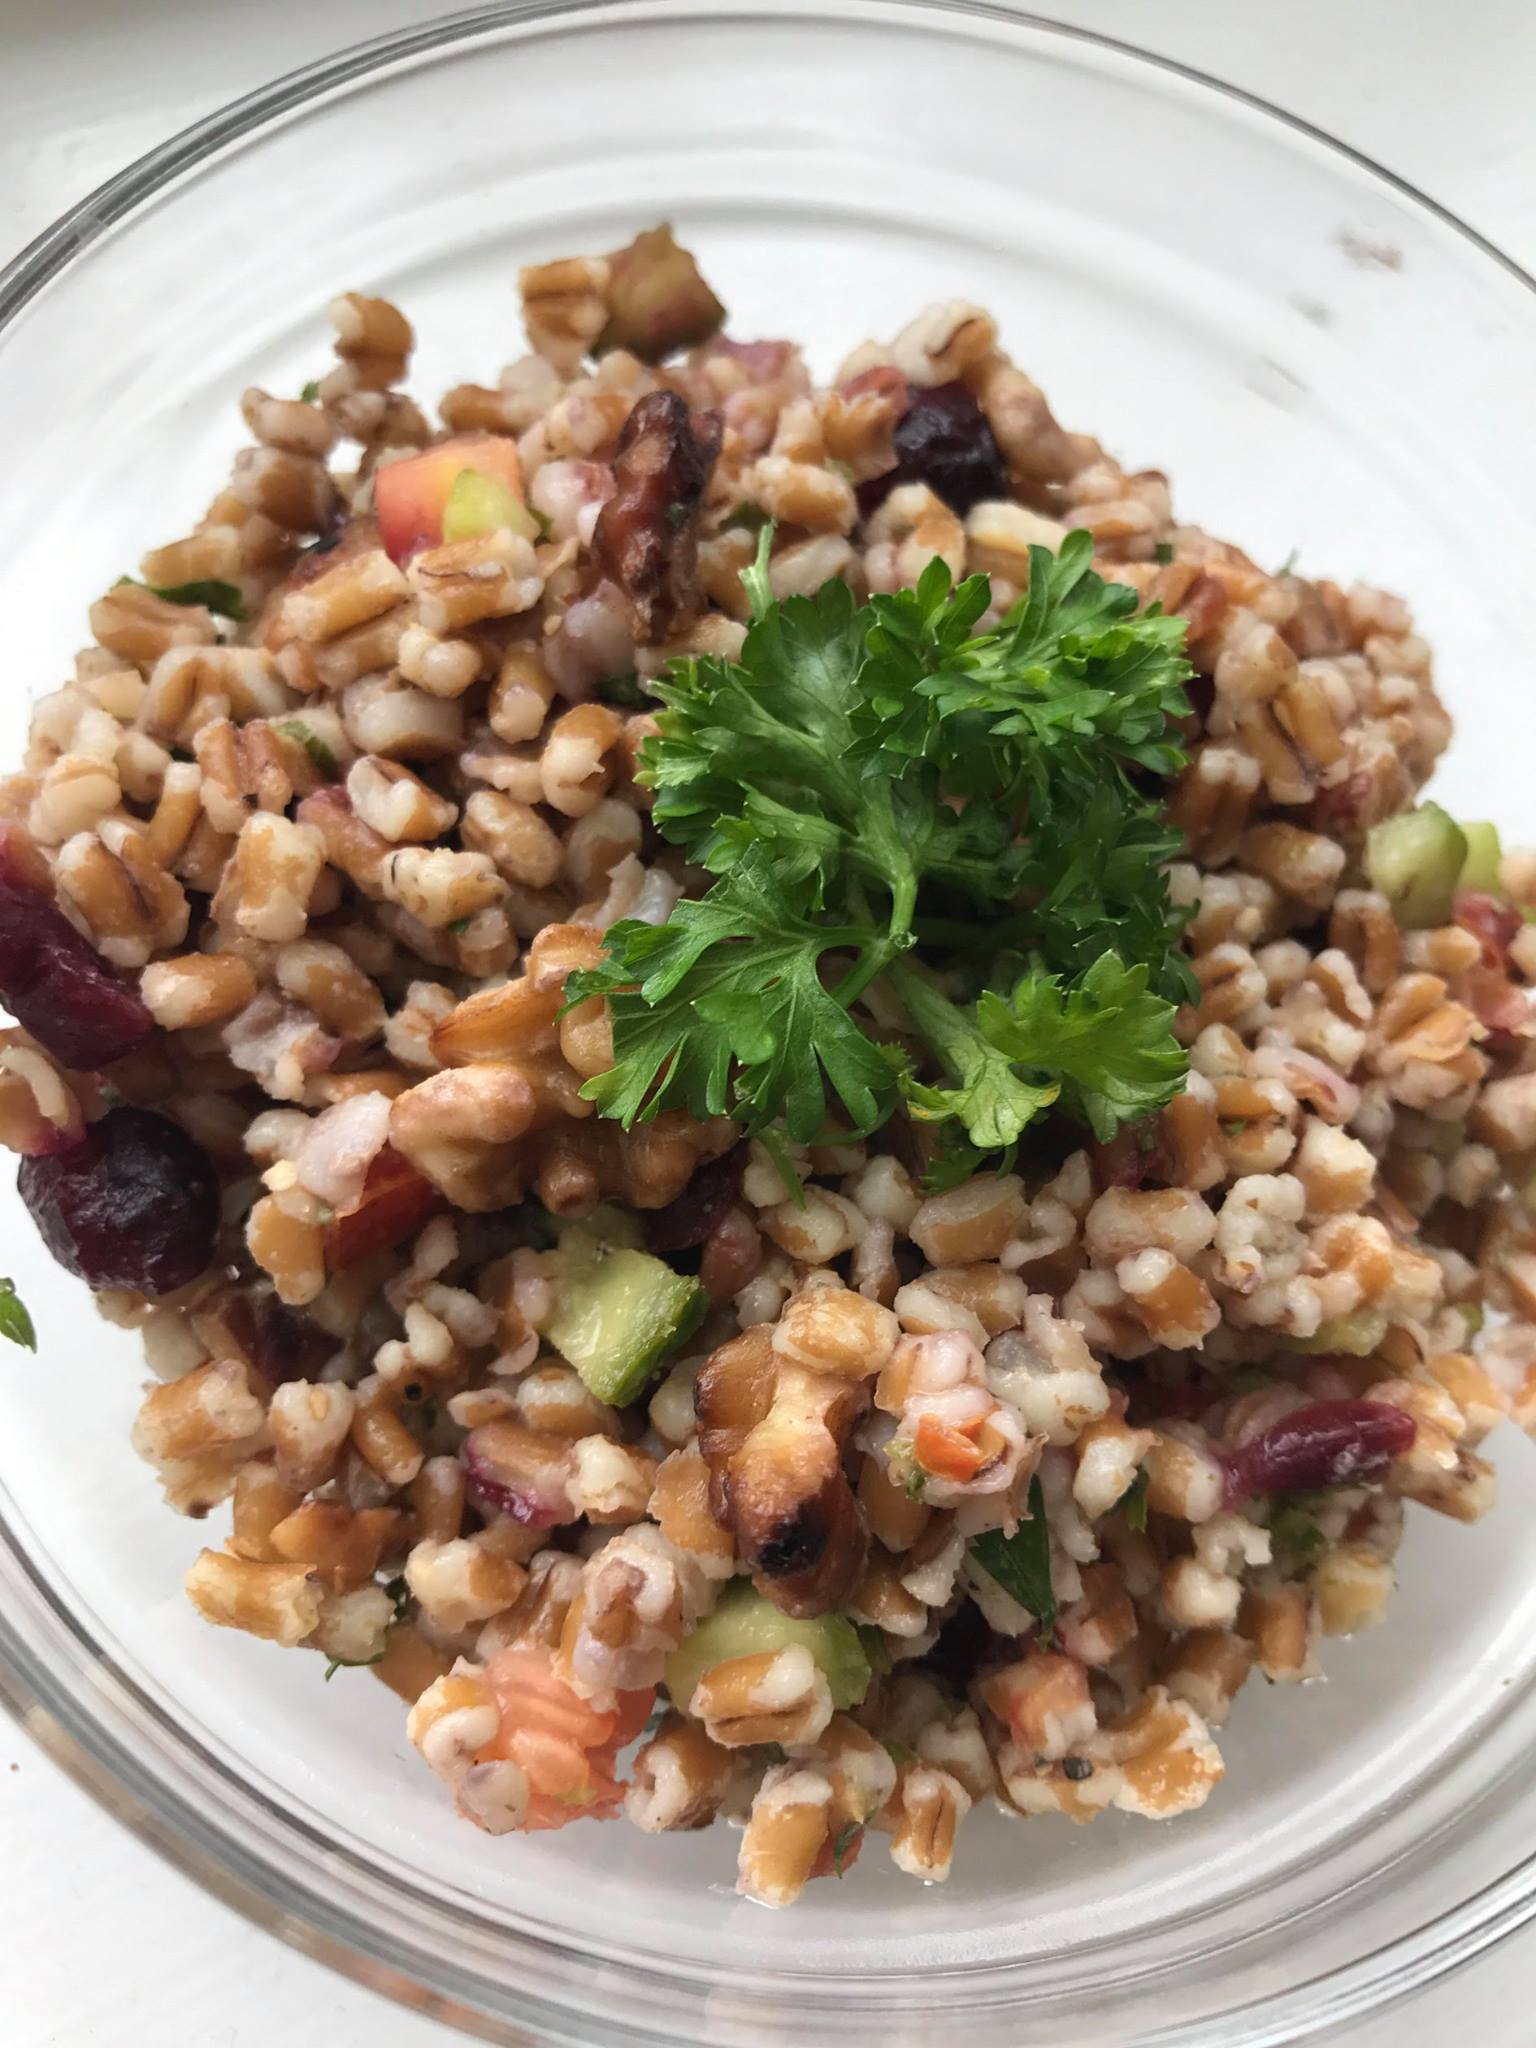 A bowl of wheat berry salad garnished with parsley